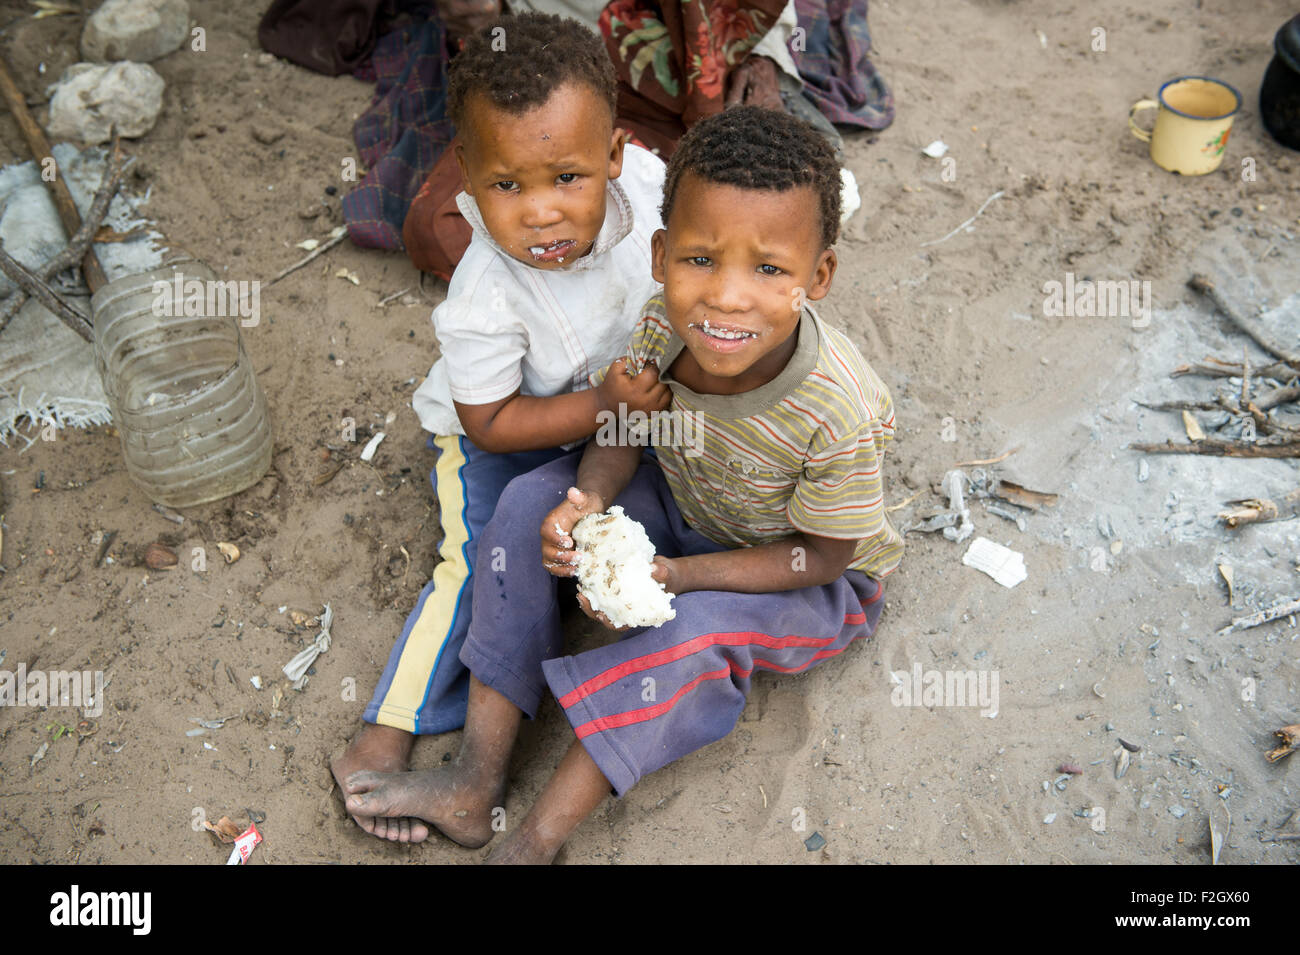 Two children eating food in their village in Botswana, Africa Stock Photo